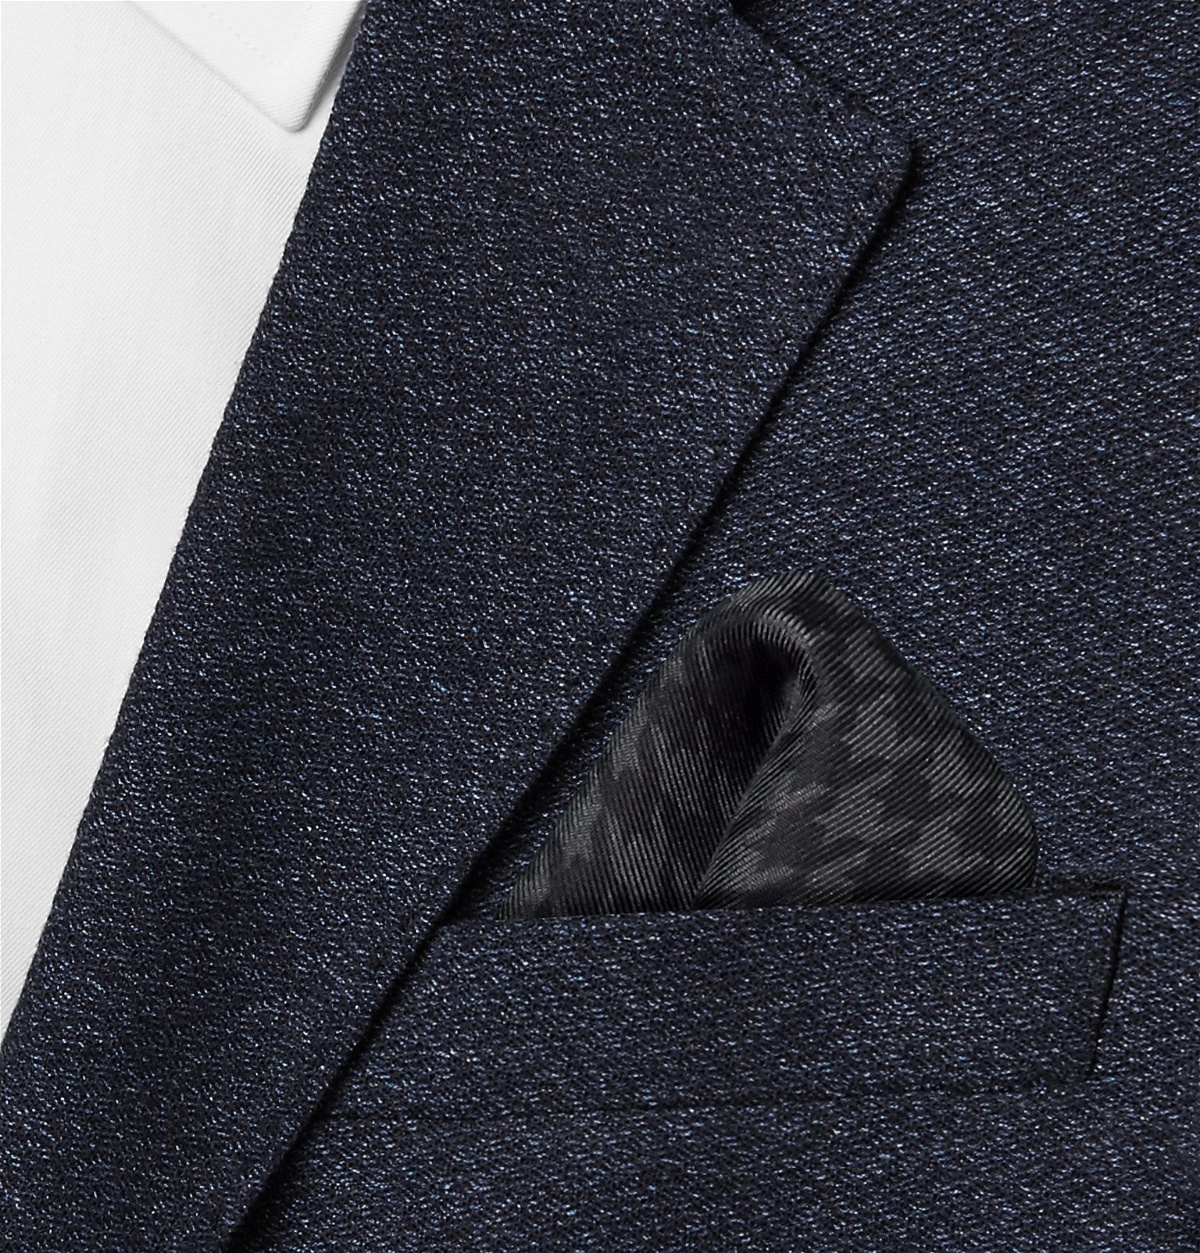 TOM FORD - Houndstooth Silk-Twill Pocket Square - Gray TOM FORD